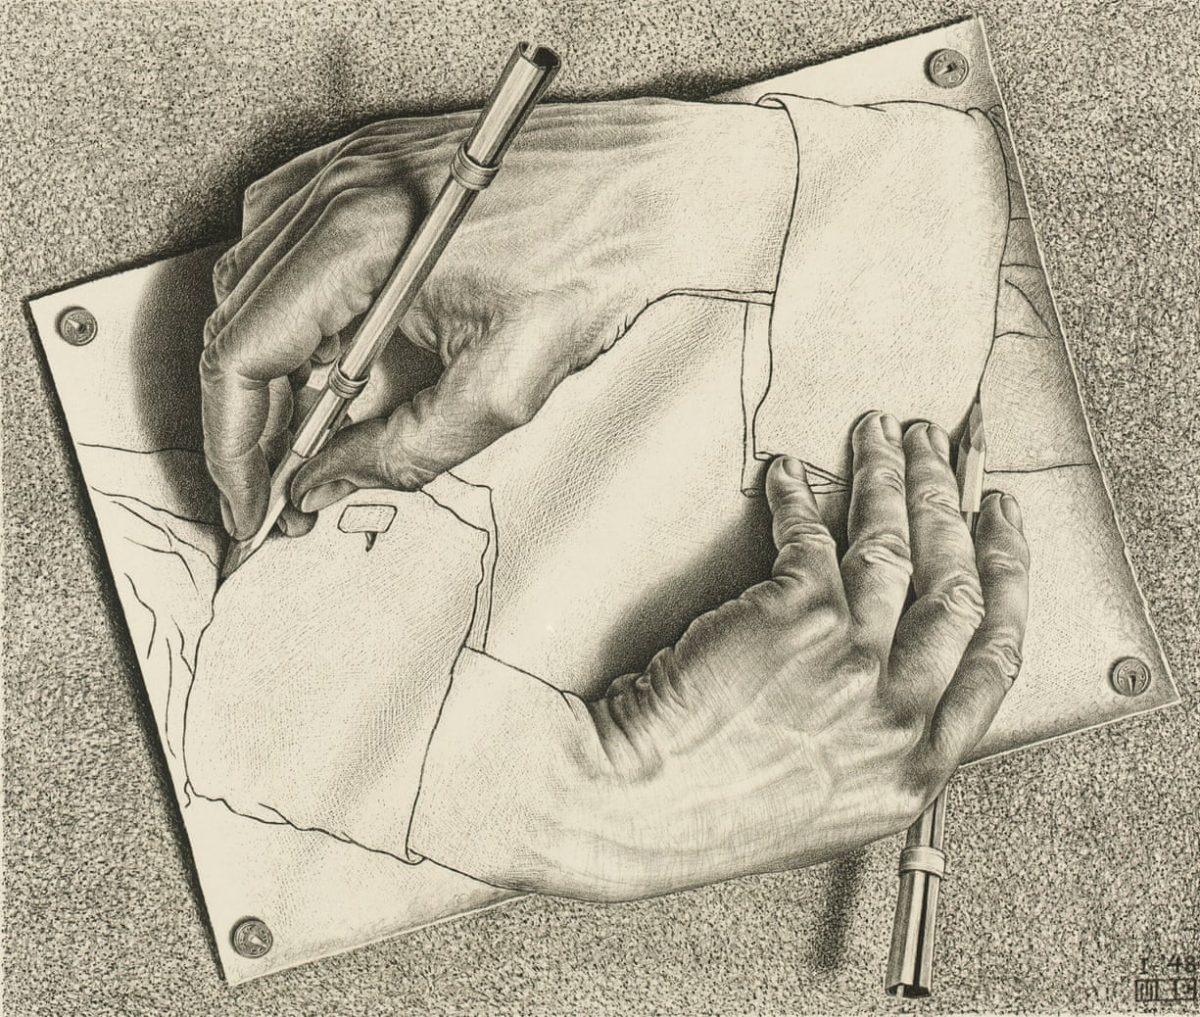 The paradoxical worlds of Maurits Escher in evident this remarkable work called Drawing Hands